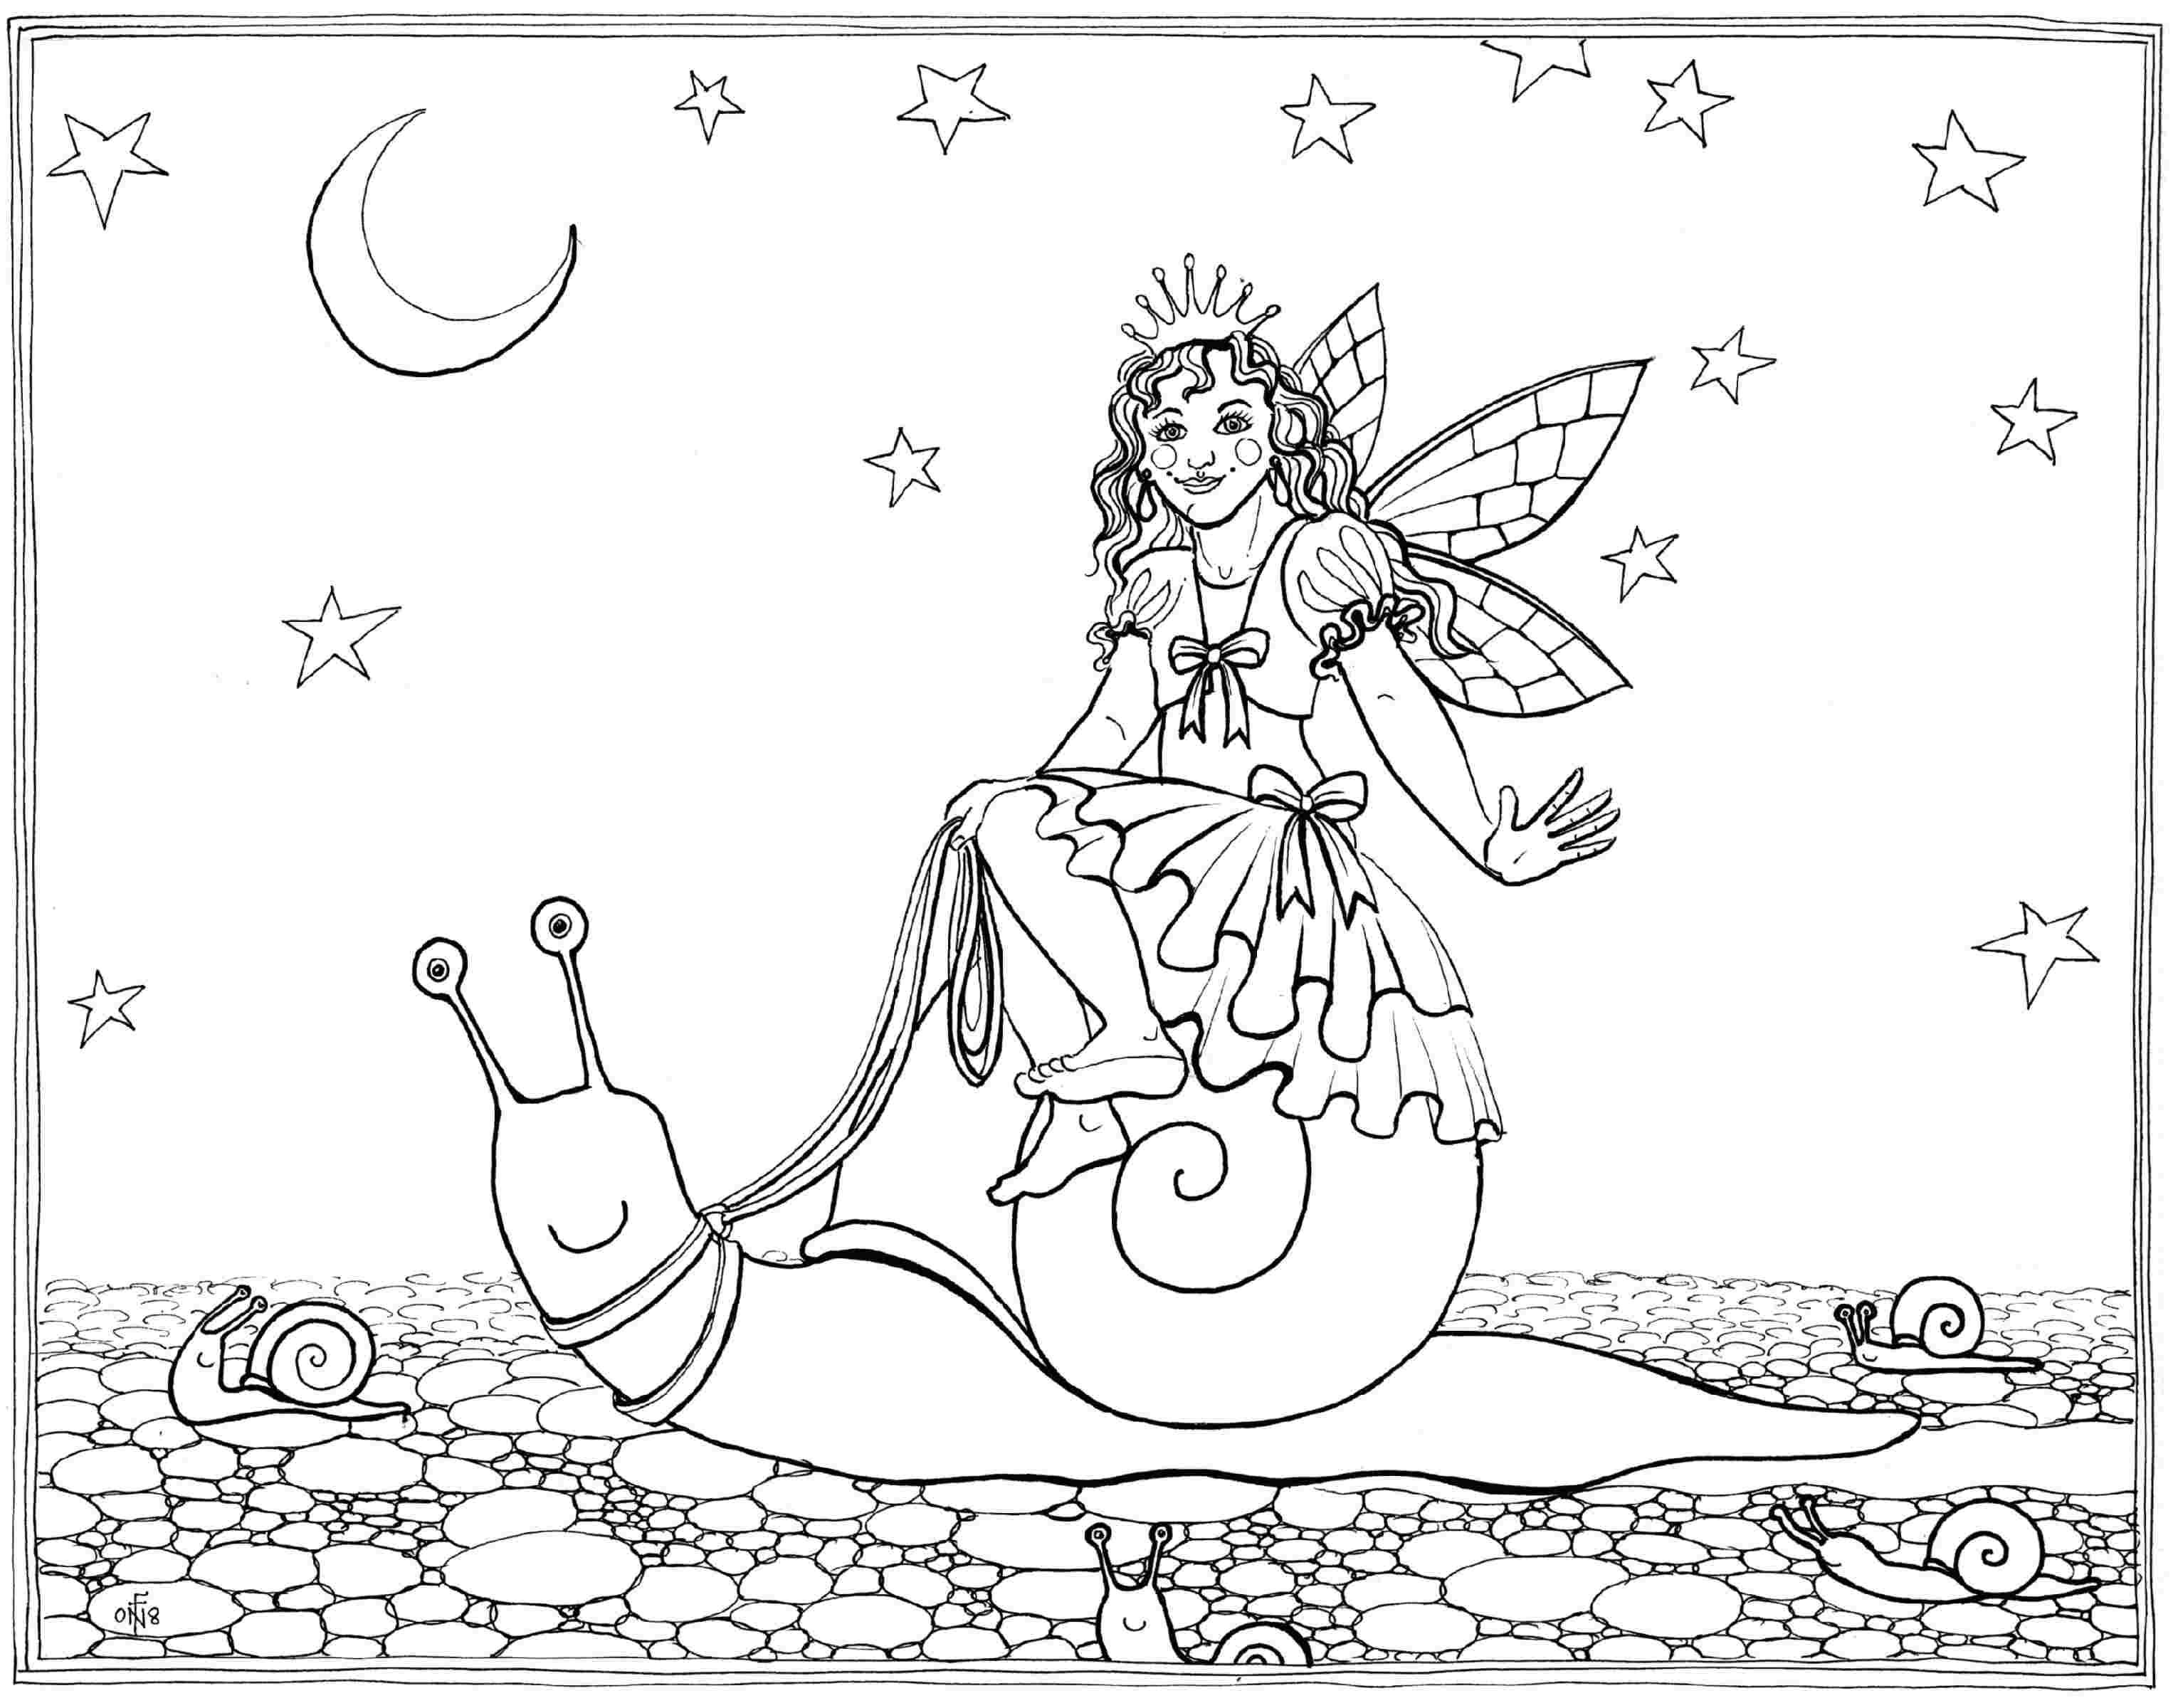 Fairy Queen's Chariot - colouring-in drawing - to download, right click and save, print out and colour in!